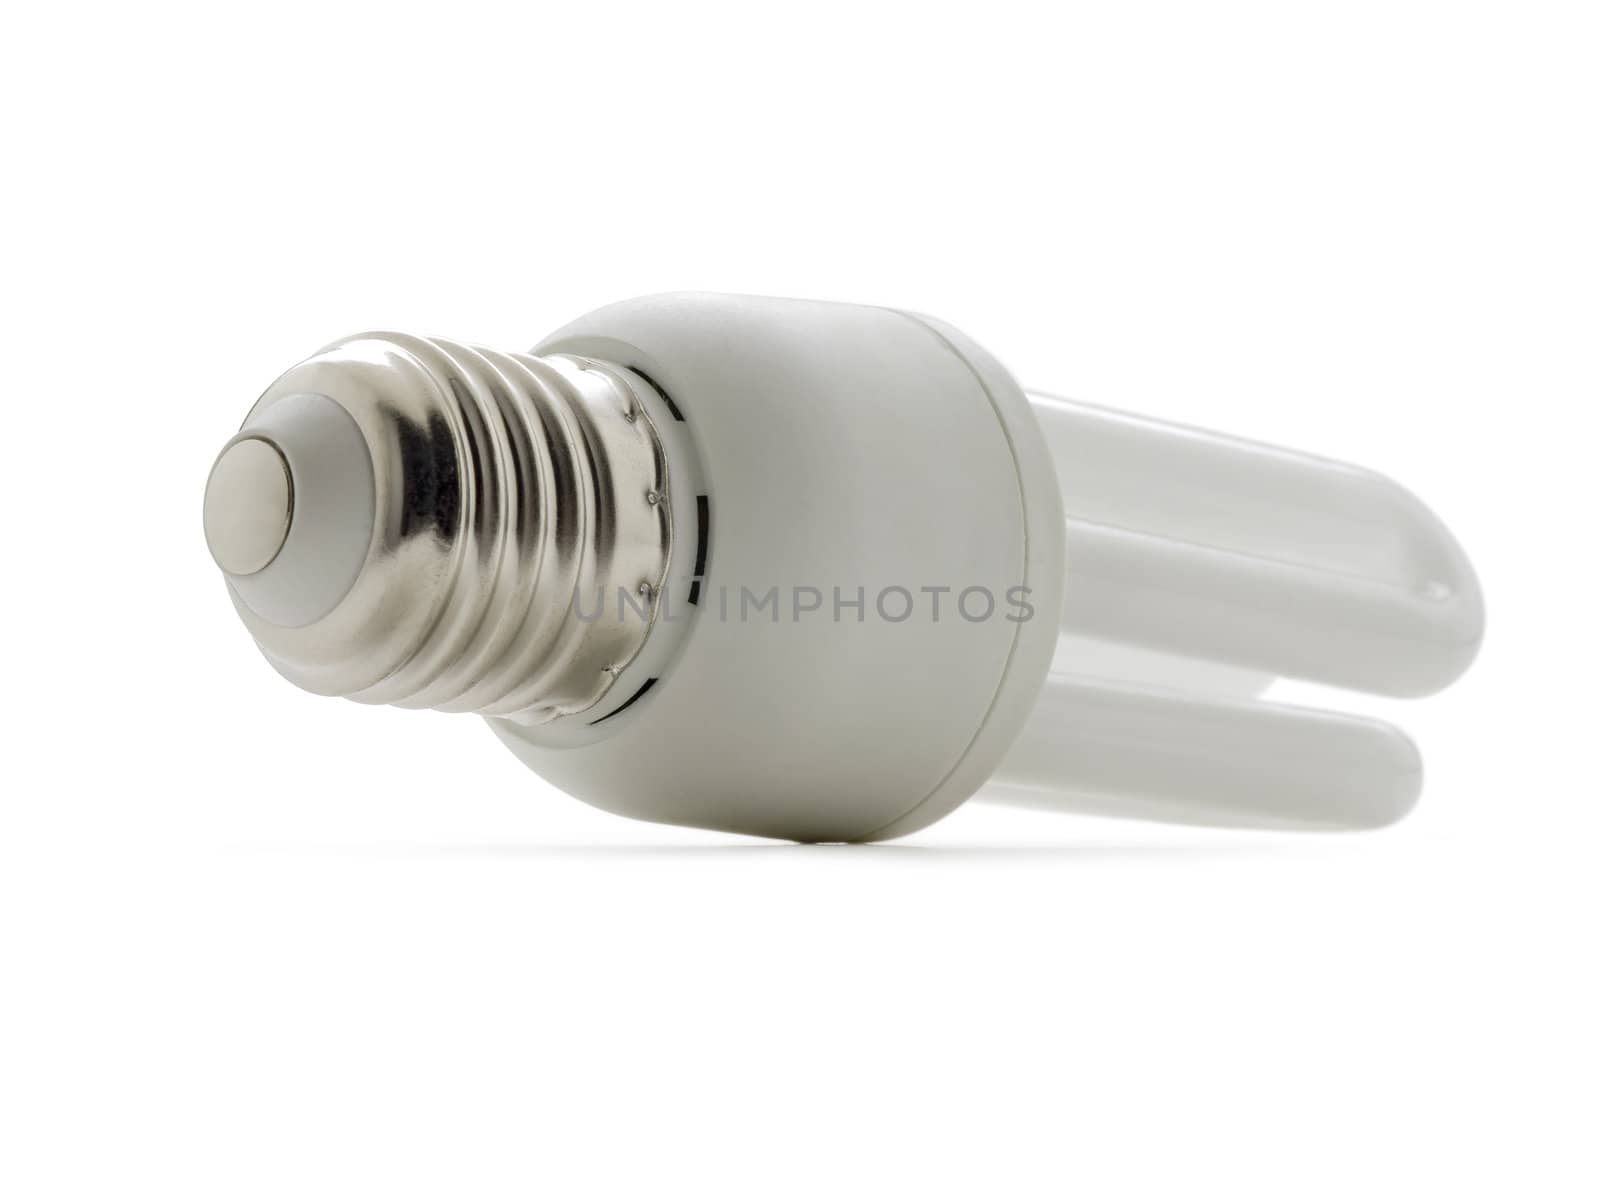 Economic Bulb (clipping path) on white